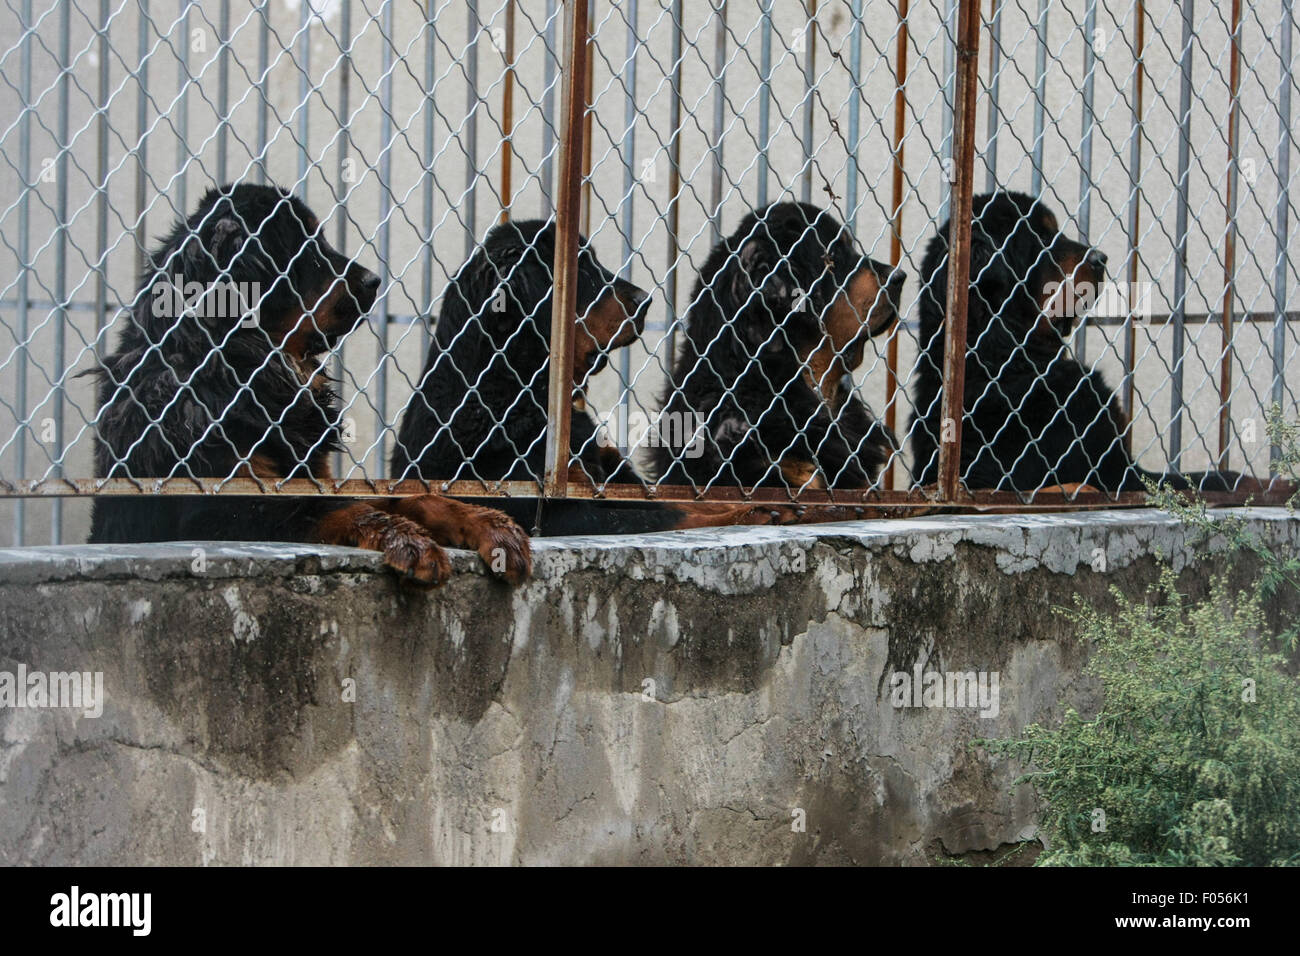 Lhasa, Tibet. 06th Aug, 2015. Tibetan mastiffs are seen at a breeding center in Lhasa, capital of southwest China's Tibet Autonomous Region, Aug. 6, 2015. The Tibetan Mastiff is a world famous and typical guardian dog species of Tibet. In recent years, due to market disorder and cross breeding, the price of Tibetan mastiffs fell sharply. However, with the aim to maintain the pure blood of the creature, a breeding center was jointly established with local farming science departments in Lhasa in 2015. Credit:  Xinhua/Alamy Live News Stock Photo